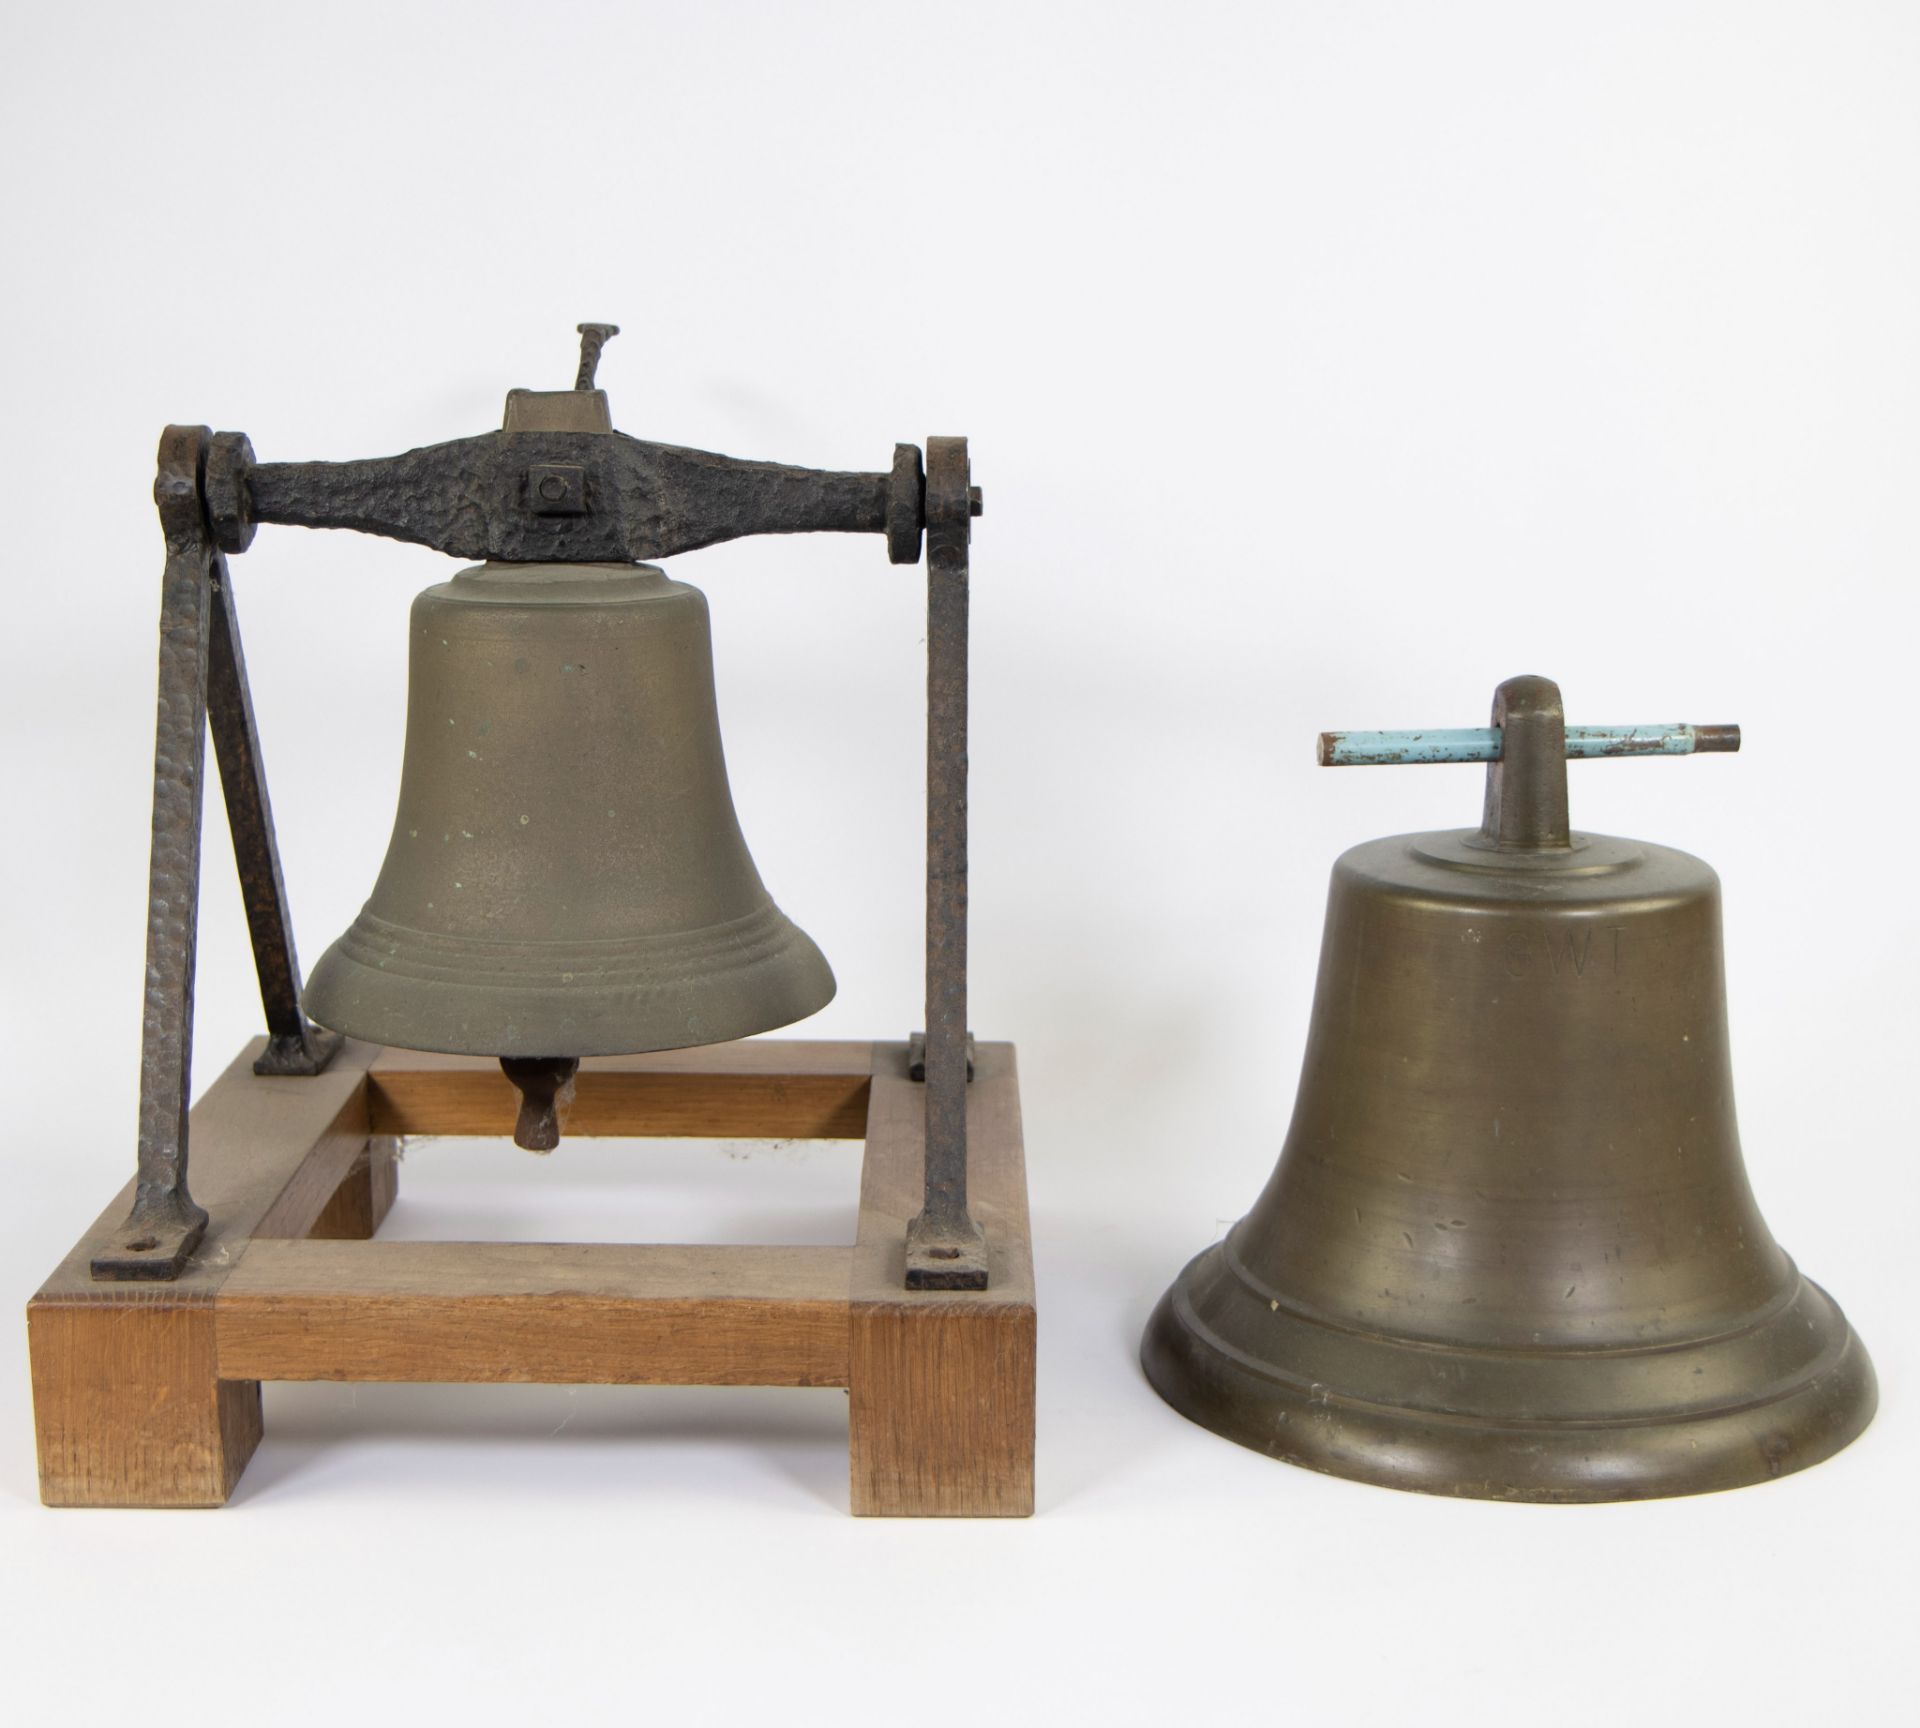 Lot of 2 bronze bells, one on a wooden frame